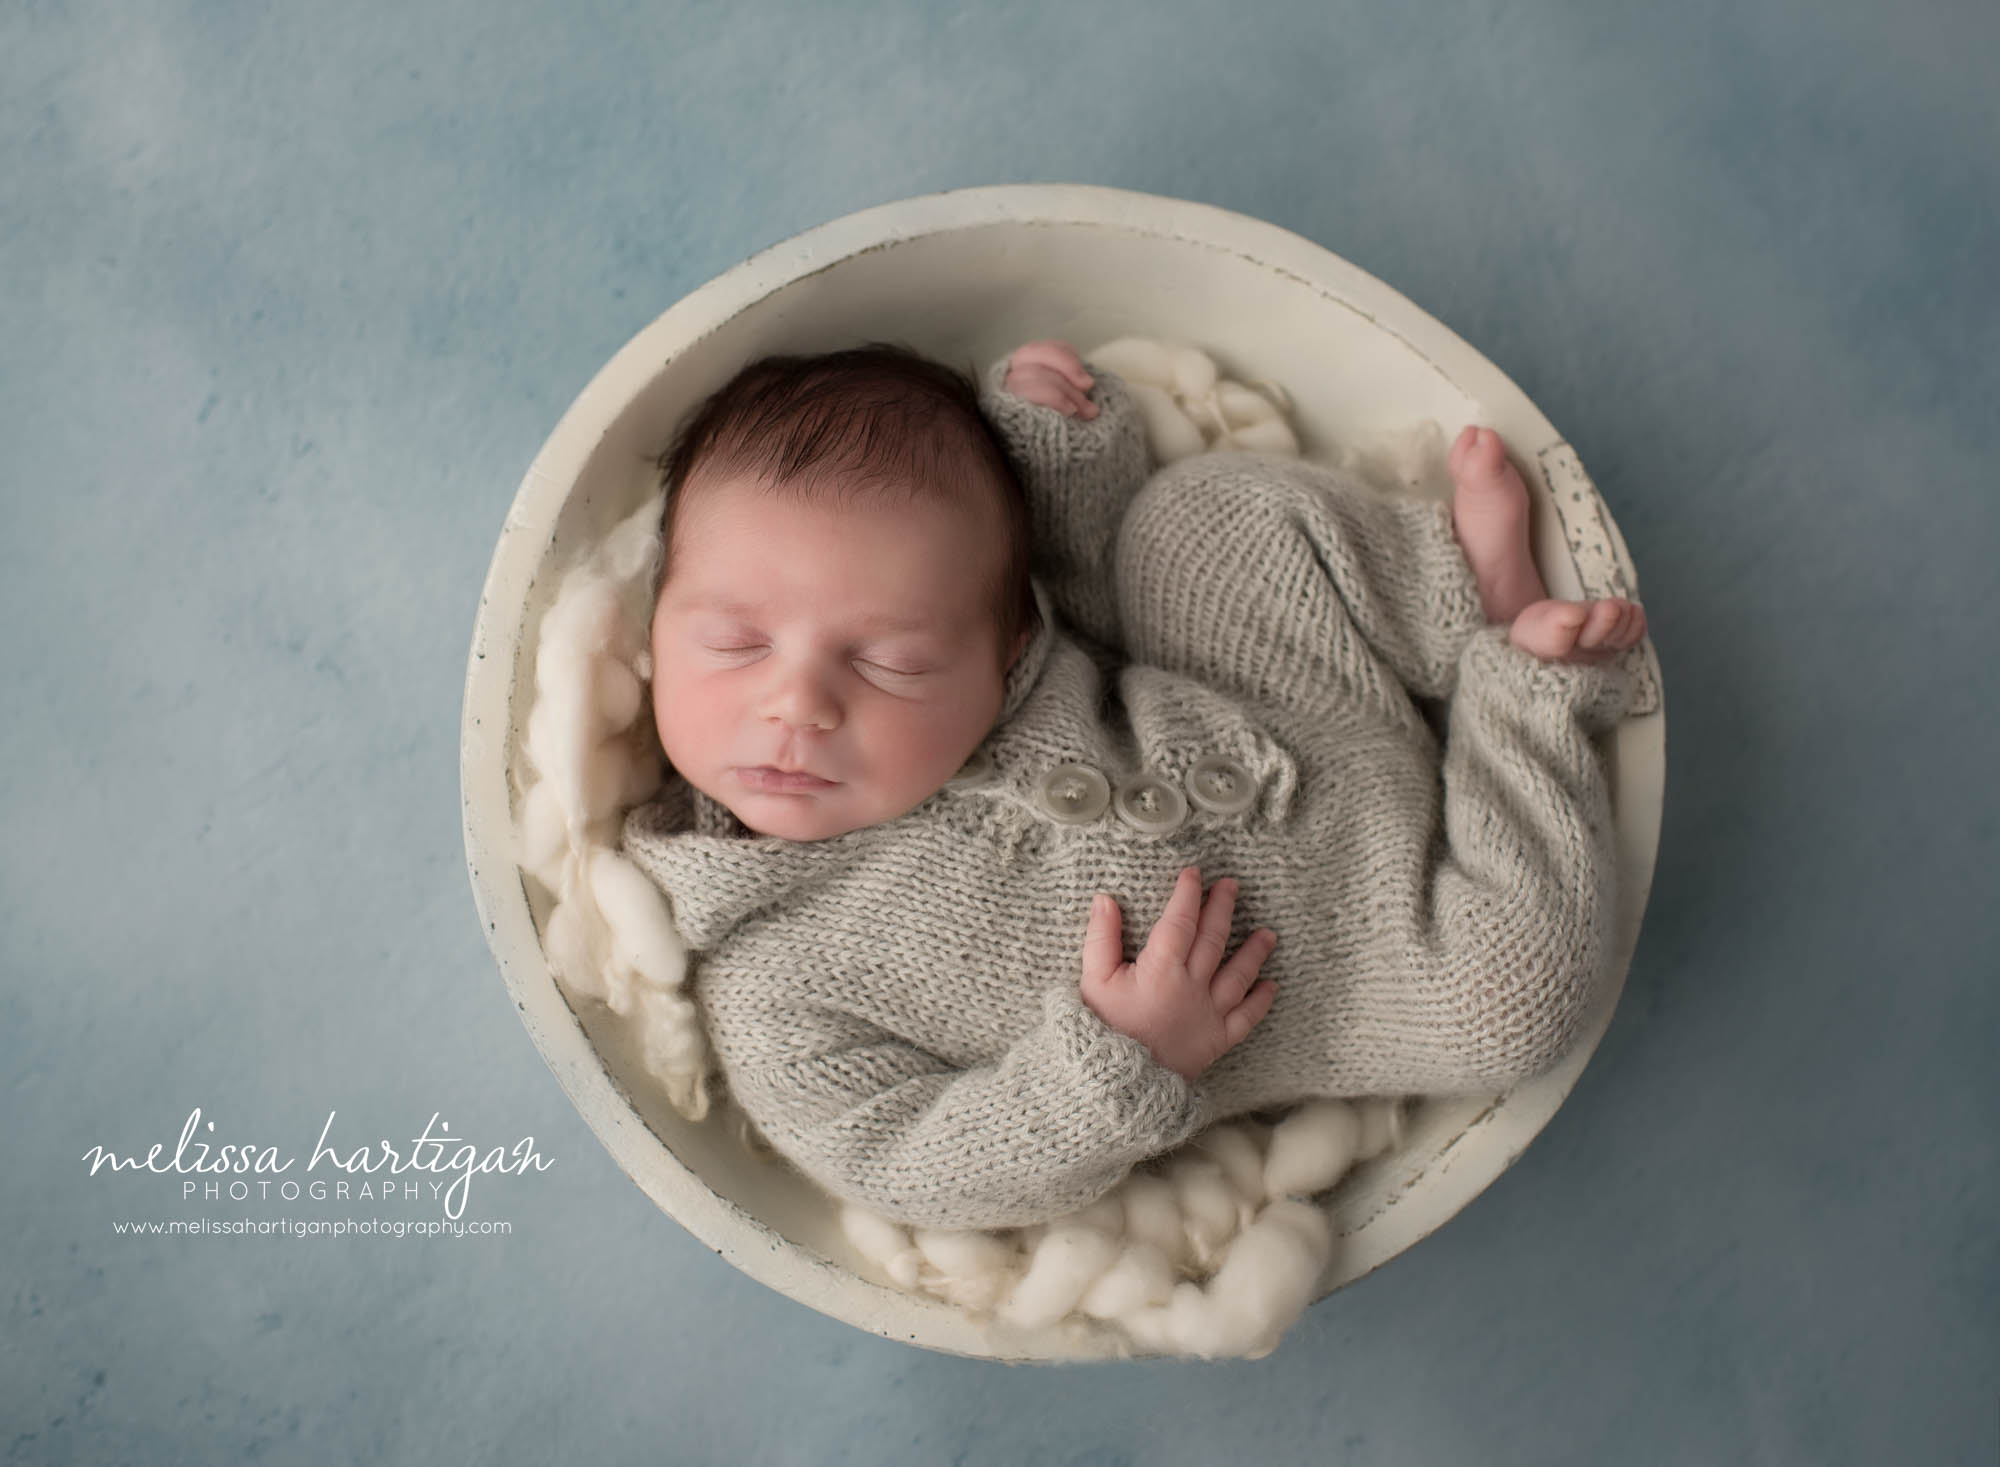 newborn baby boy wearing light grey knitted outfit posed in white wooden bowl with cream layer CT newborn Photography